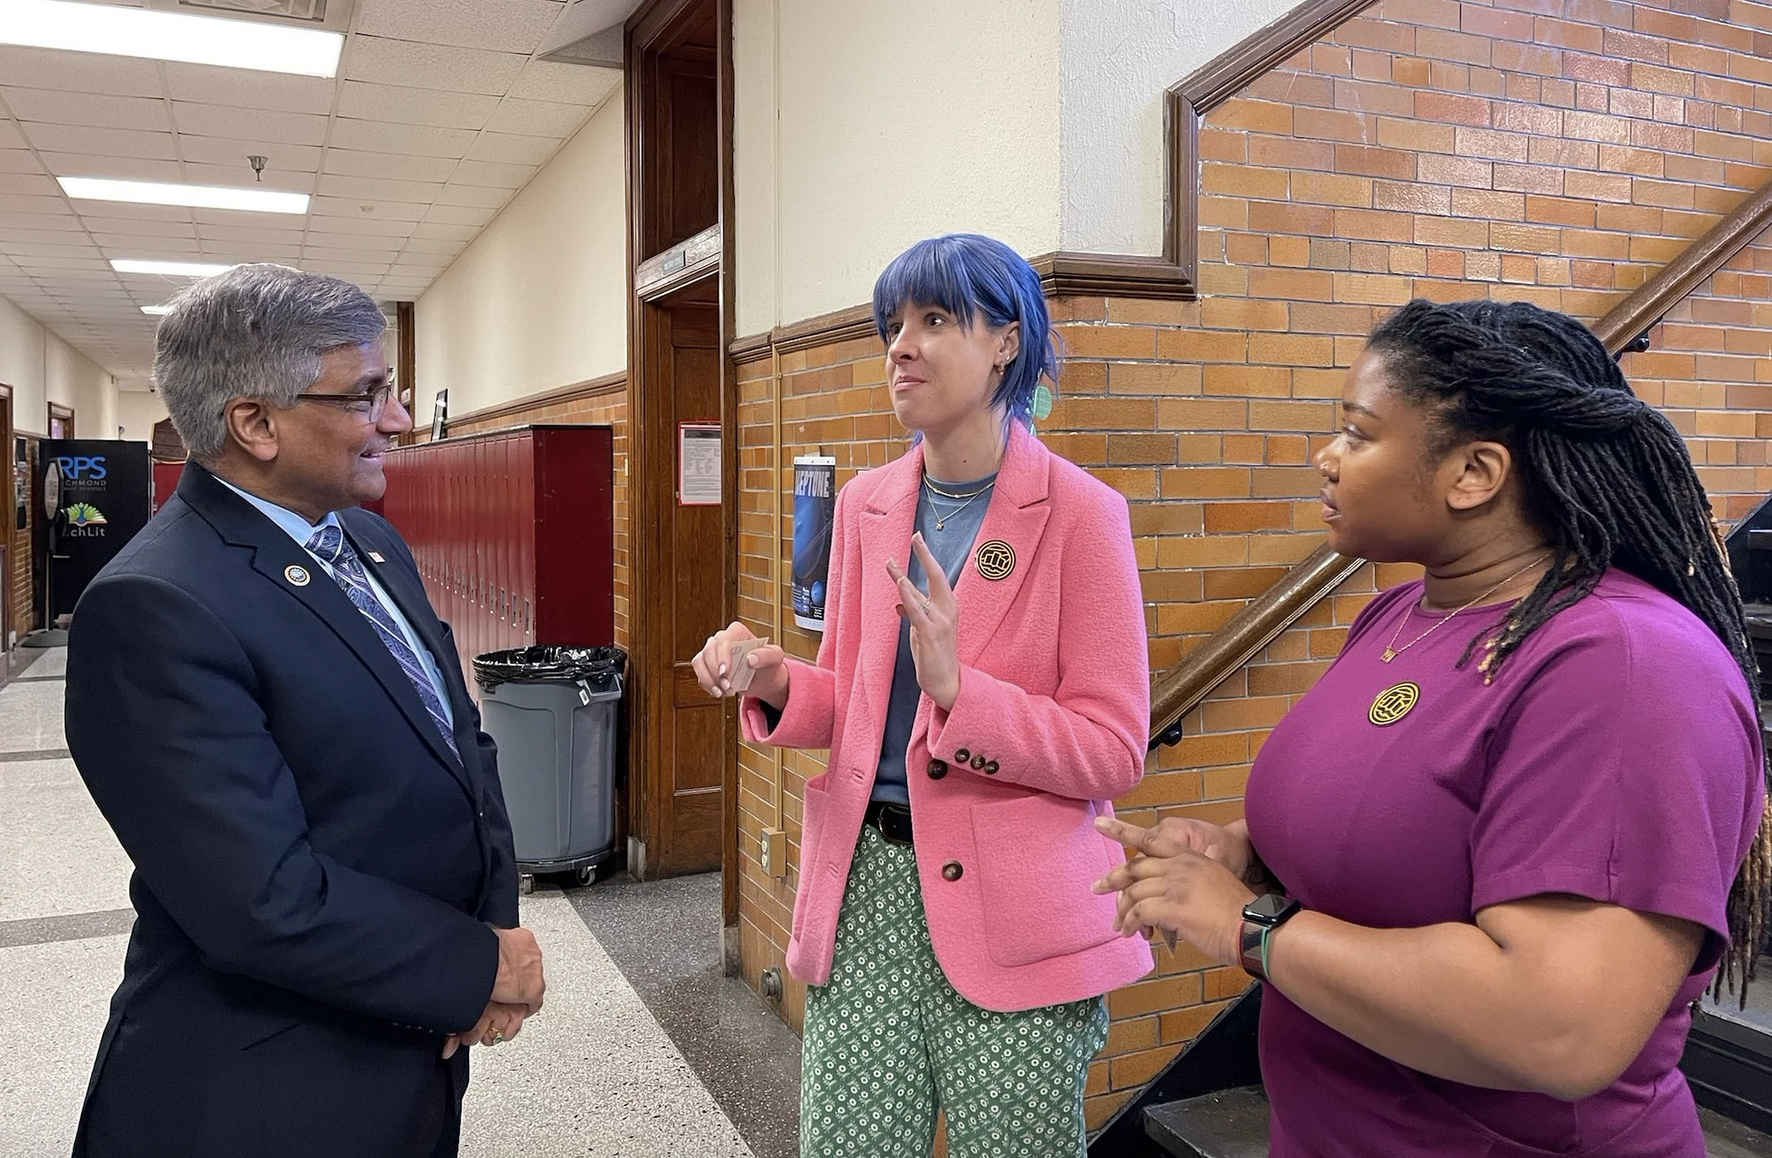 NSF director visits VCU and calls it one of the U.S. universities that ‘matter for the future’